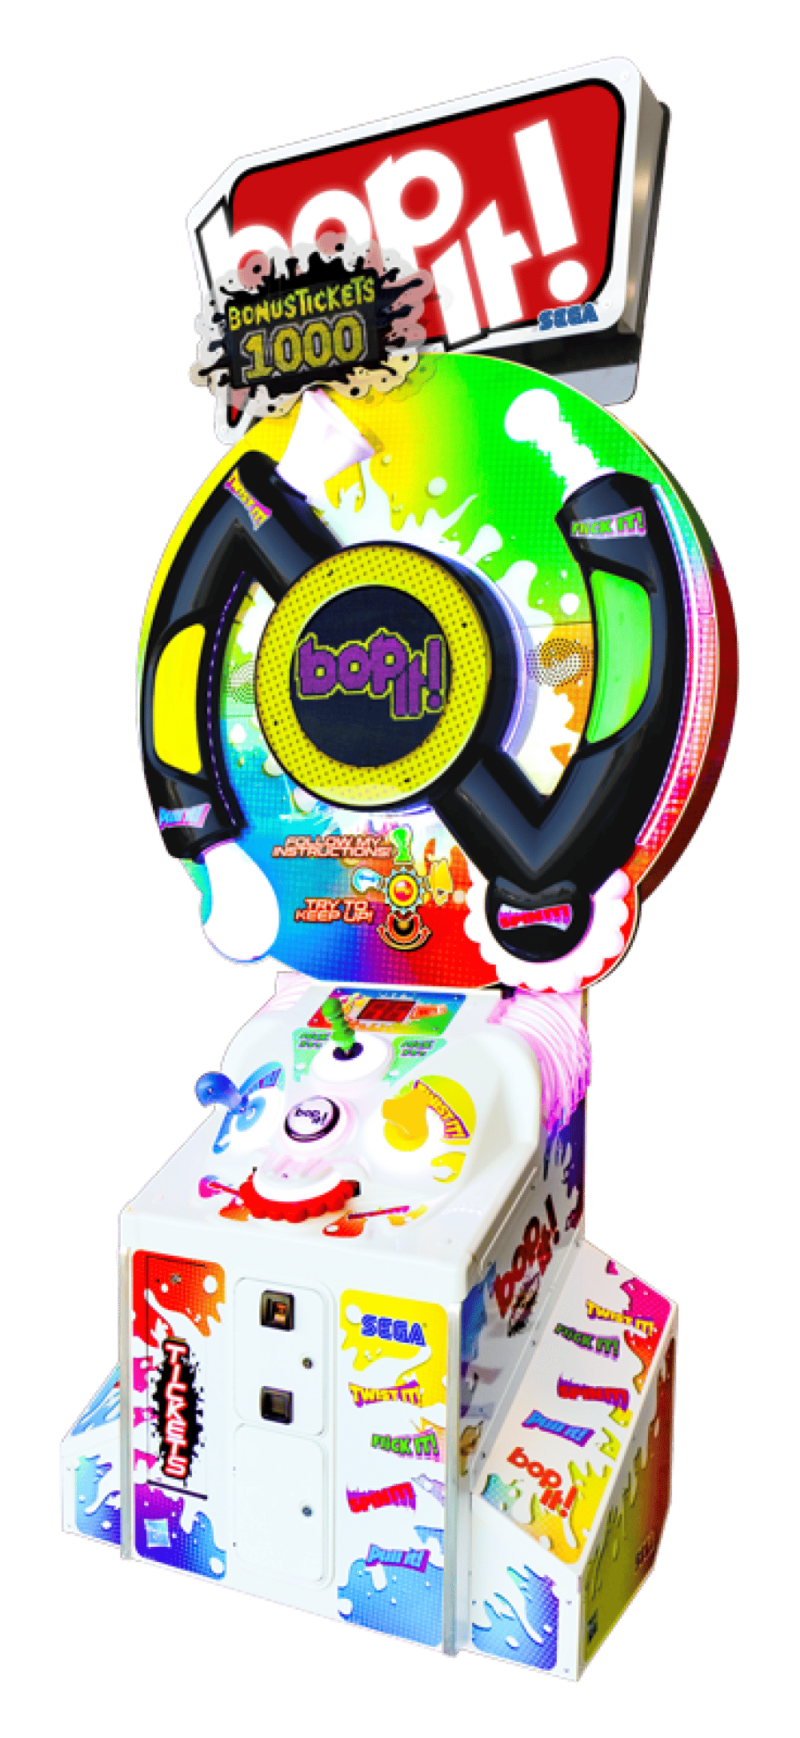 Bop It Cabinet 1 by Interactive Entertainment Group, Inc.